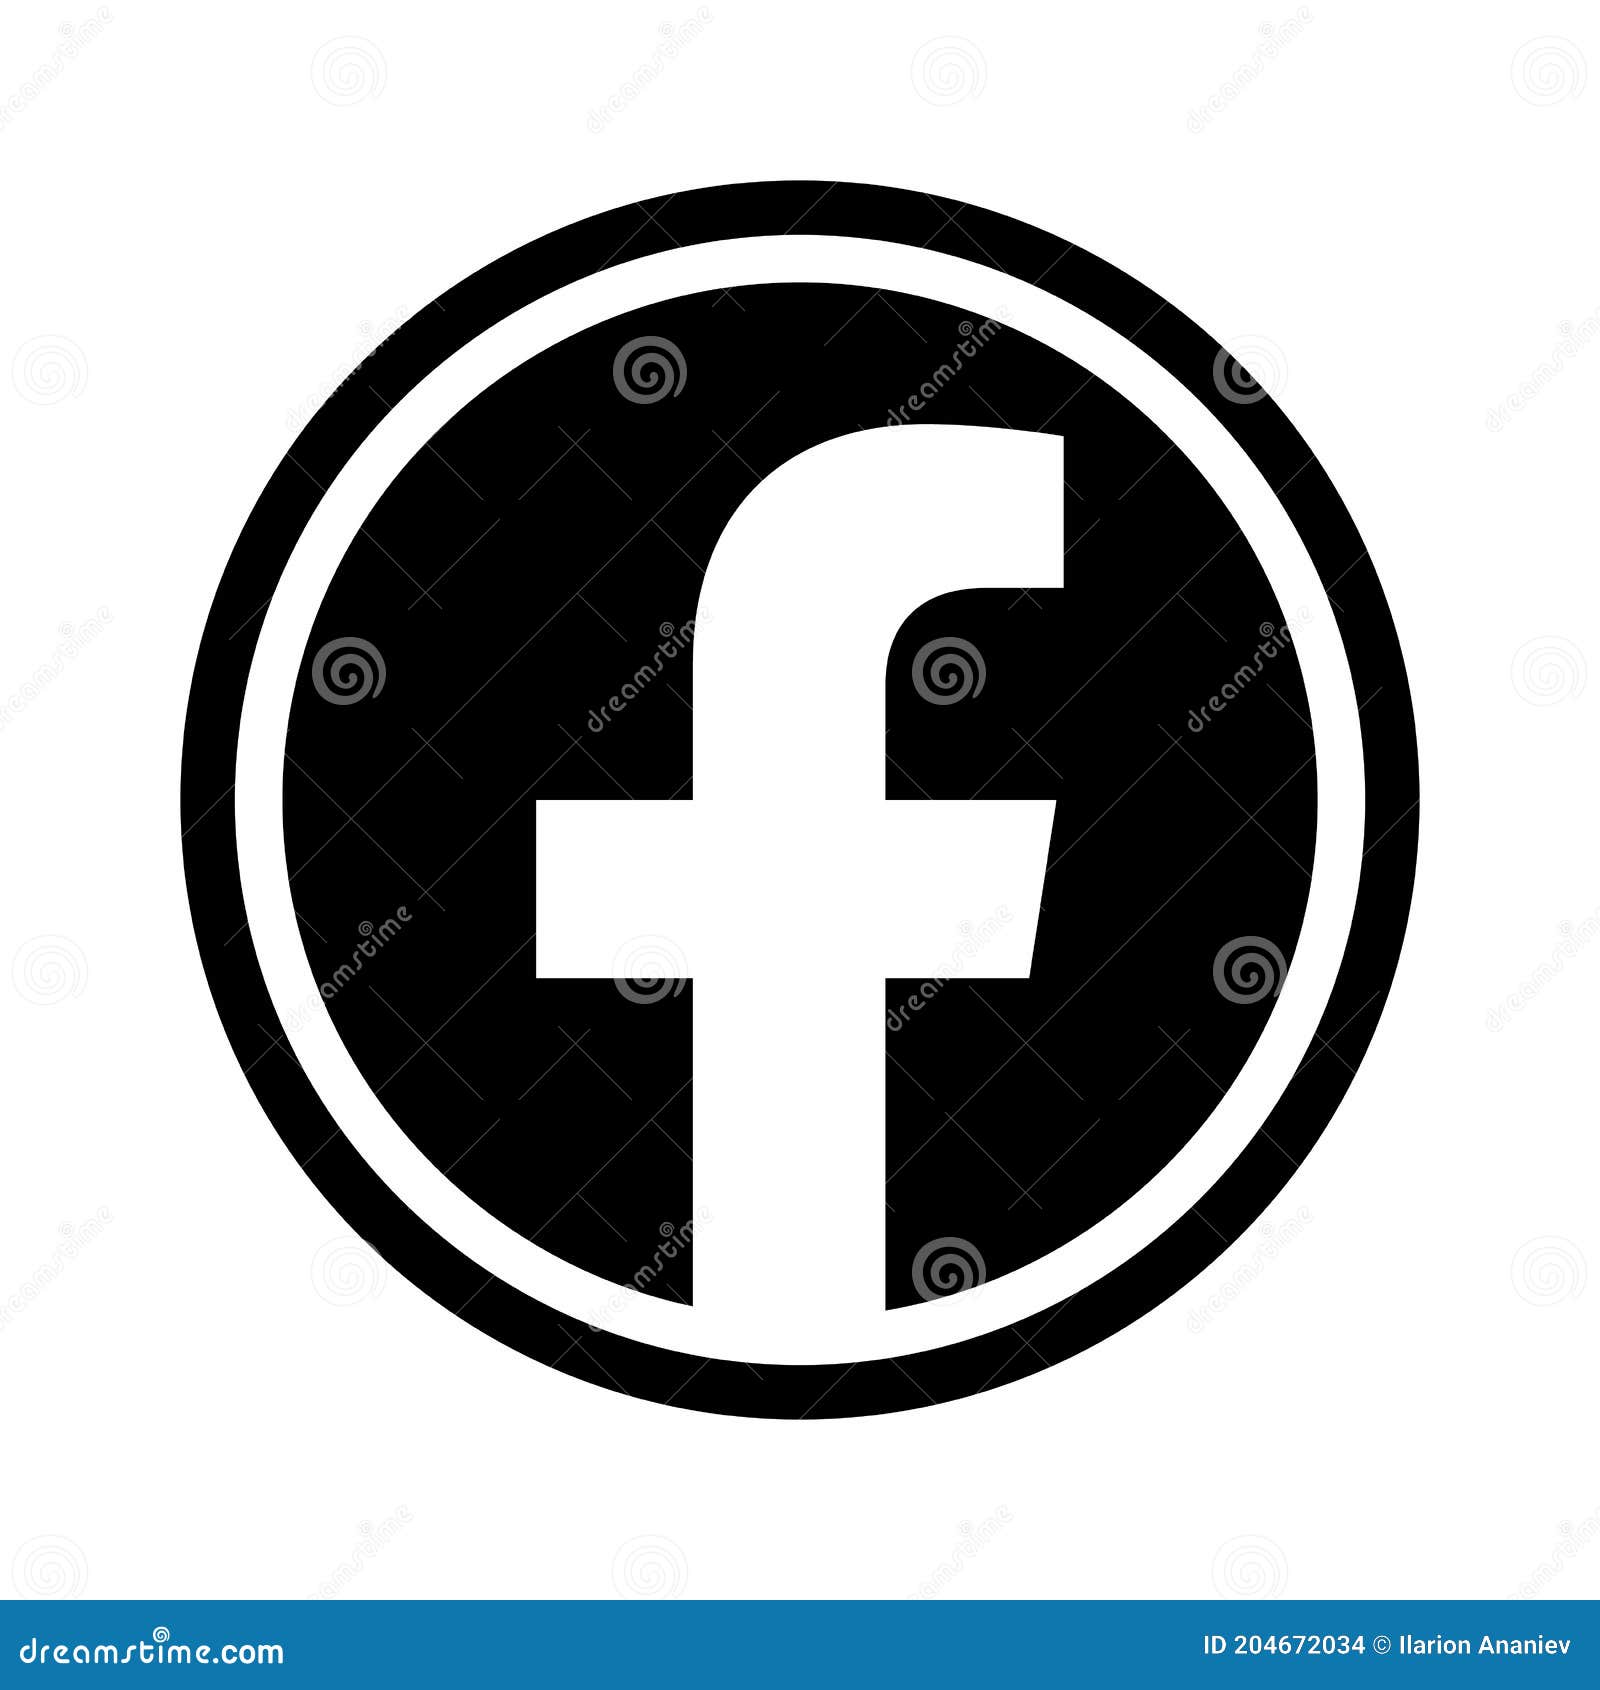 Facebook Logo Vector Black Silhouette Shape Isolated F Icon For Web Page Mobile App Or Print Materials Transparent Templa Editorial Stock Image Illustration Of Original Design